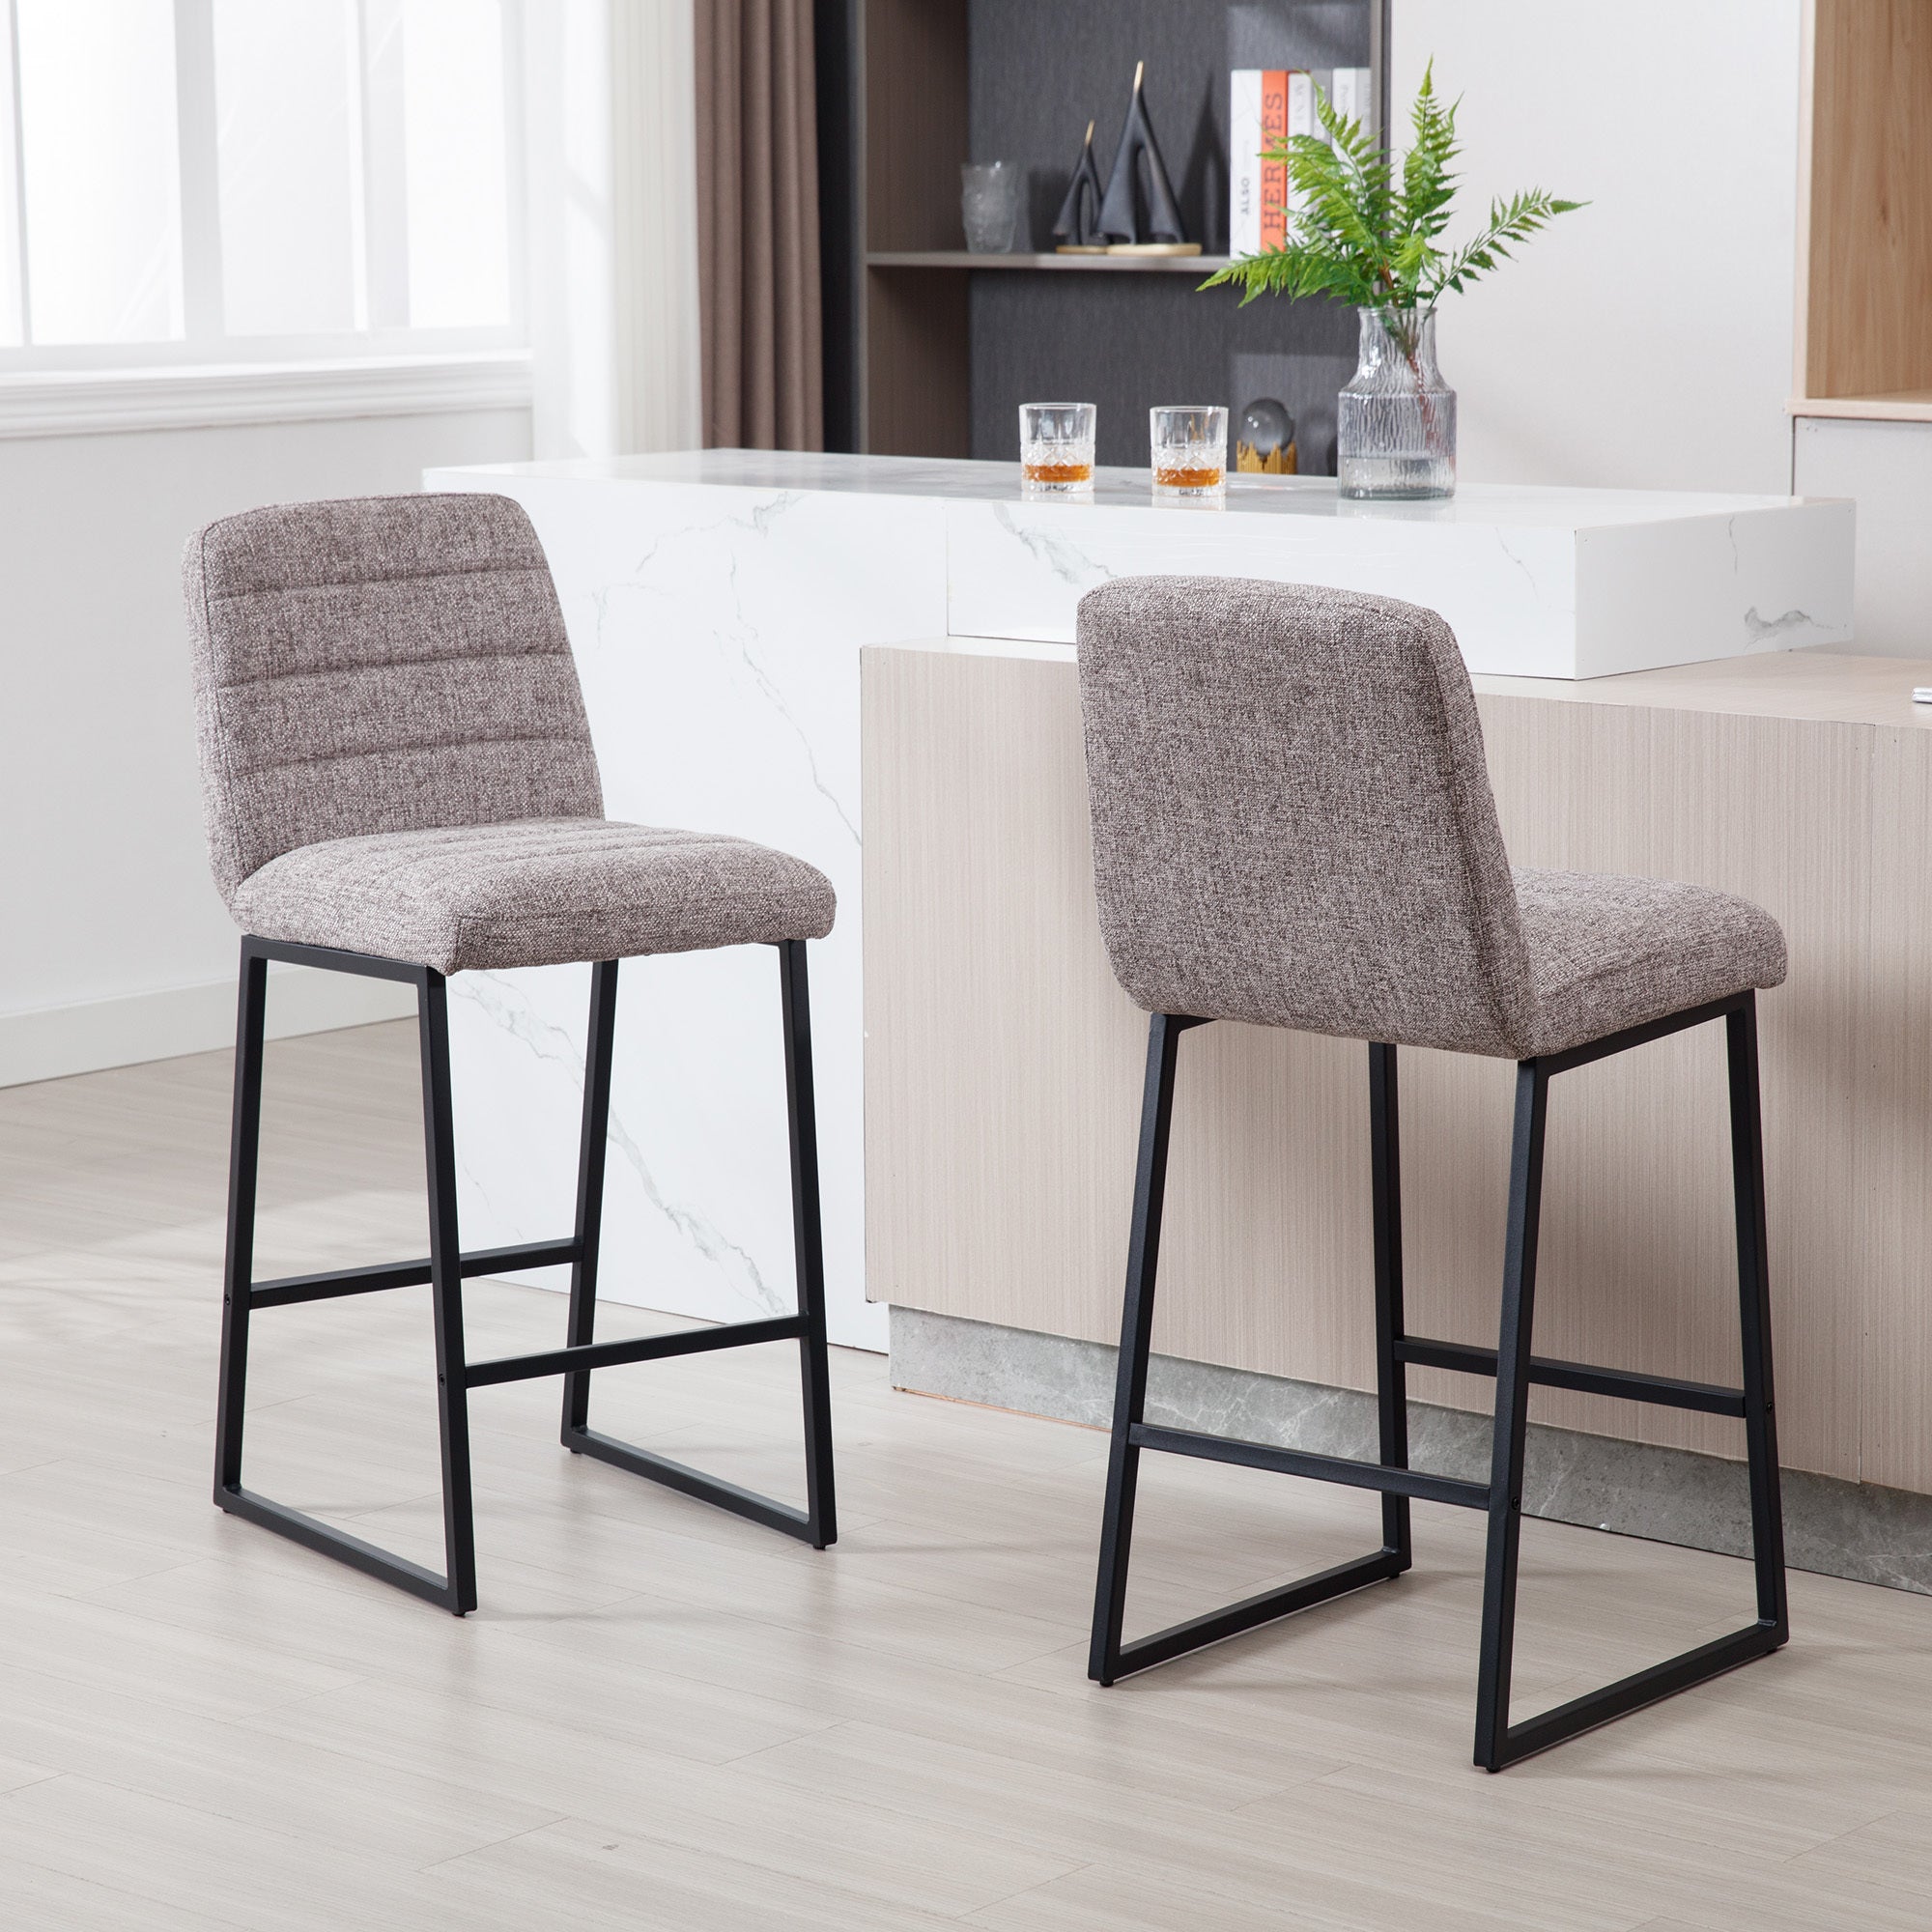 Low Bar Stools Set of 2 Bar Chairs for Living Room coffee-kitchen-foam-dry clean-modern-bar